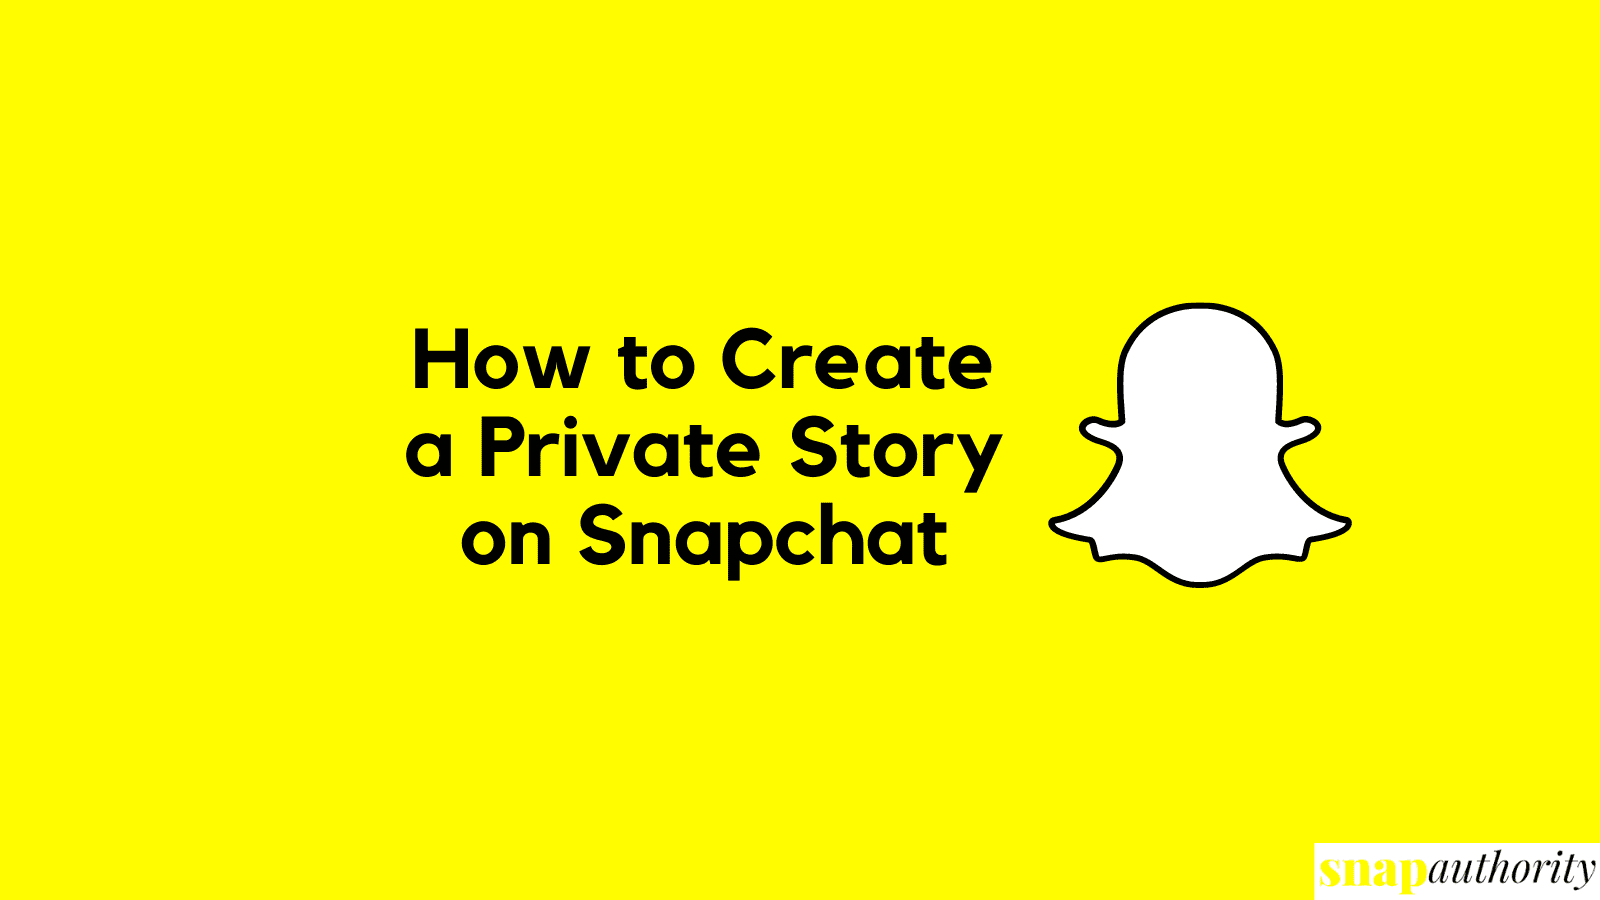 How to create a private story on Snapchat_1